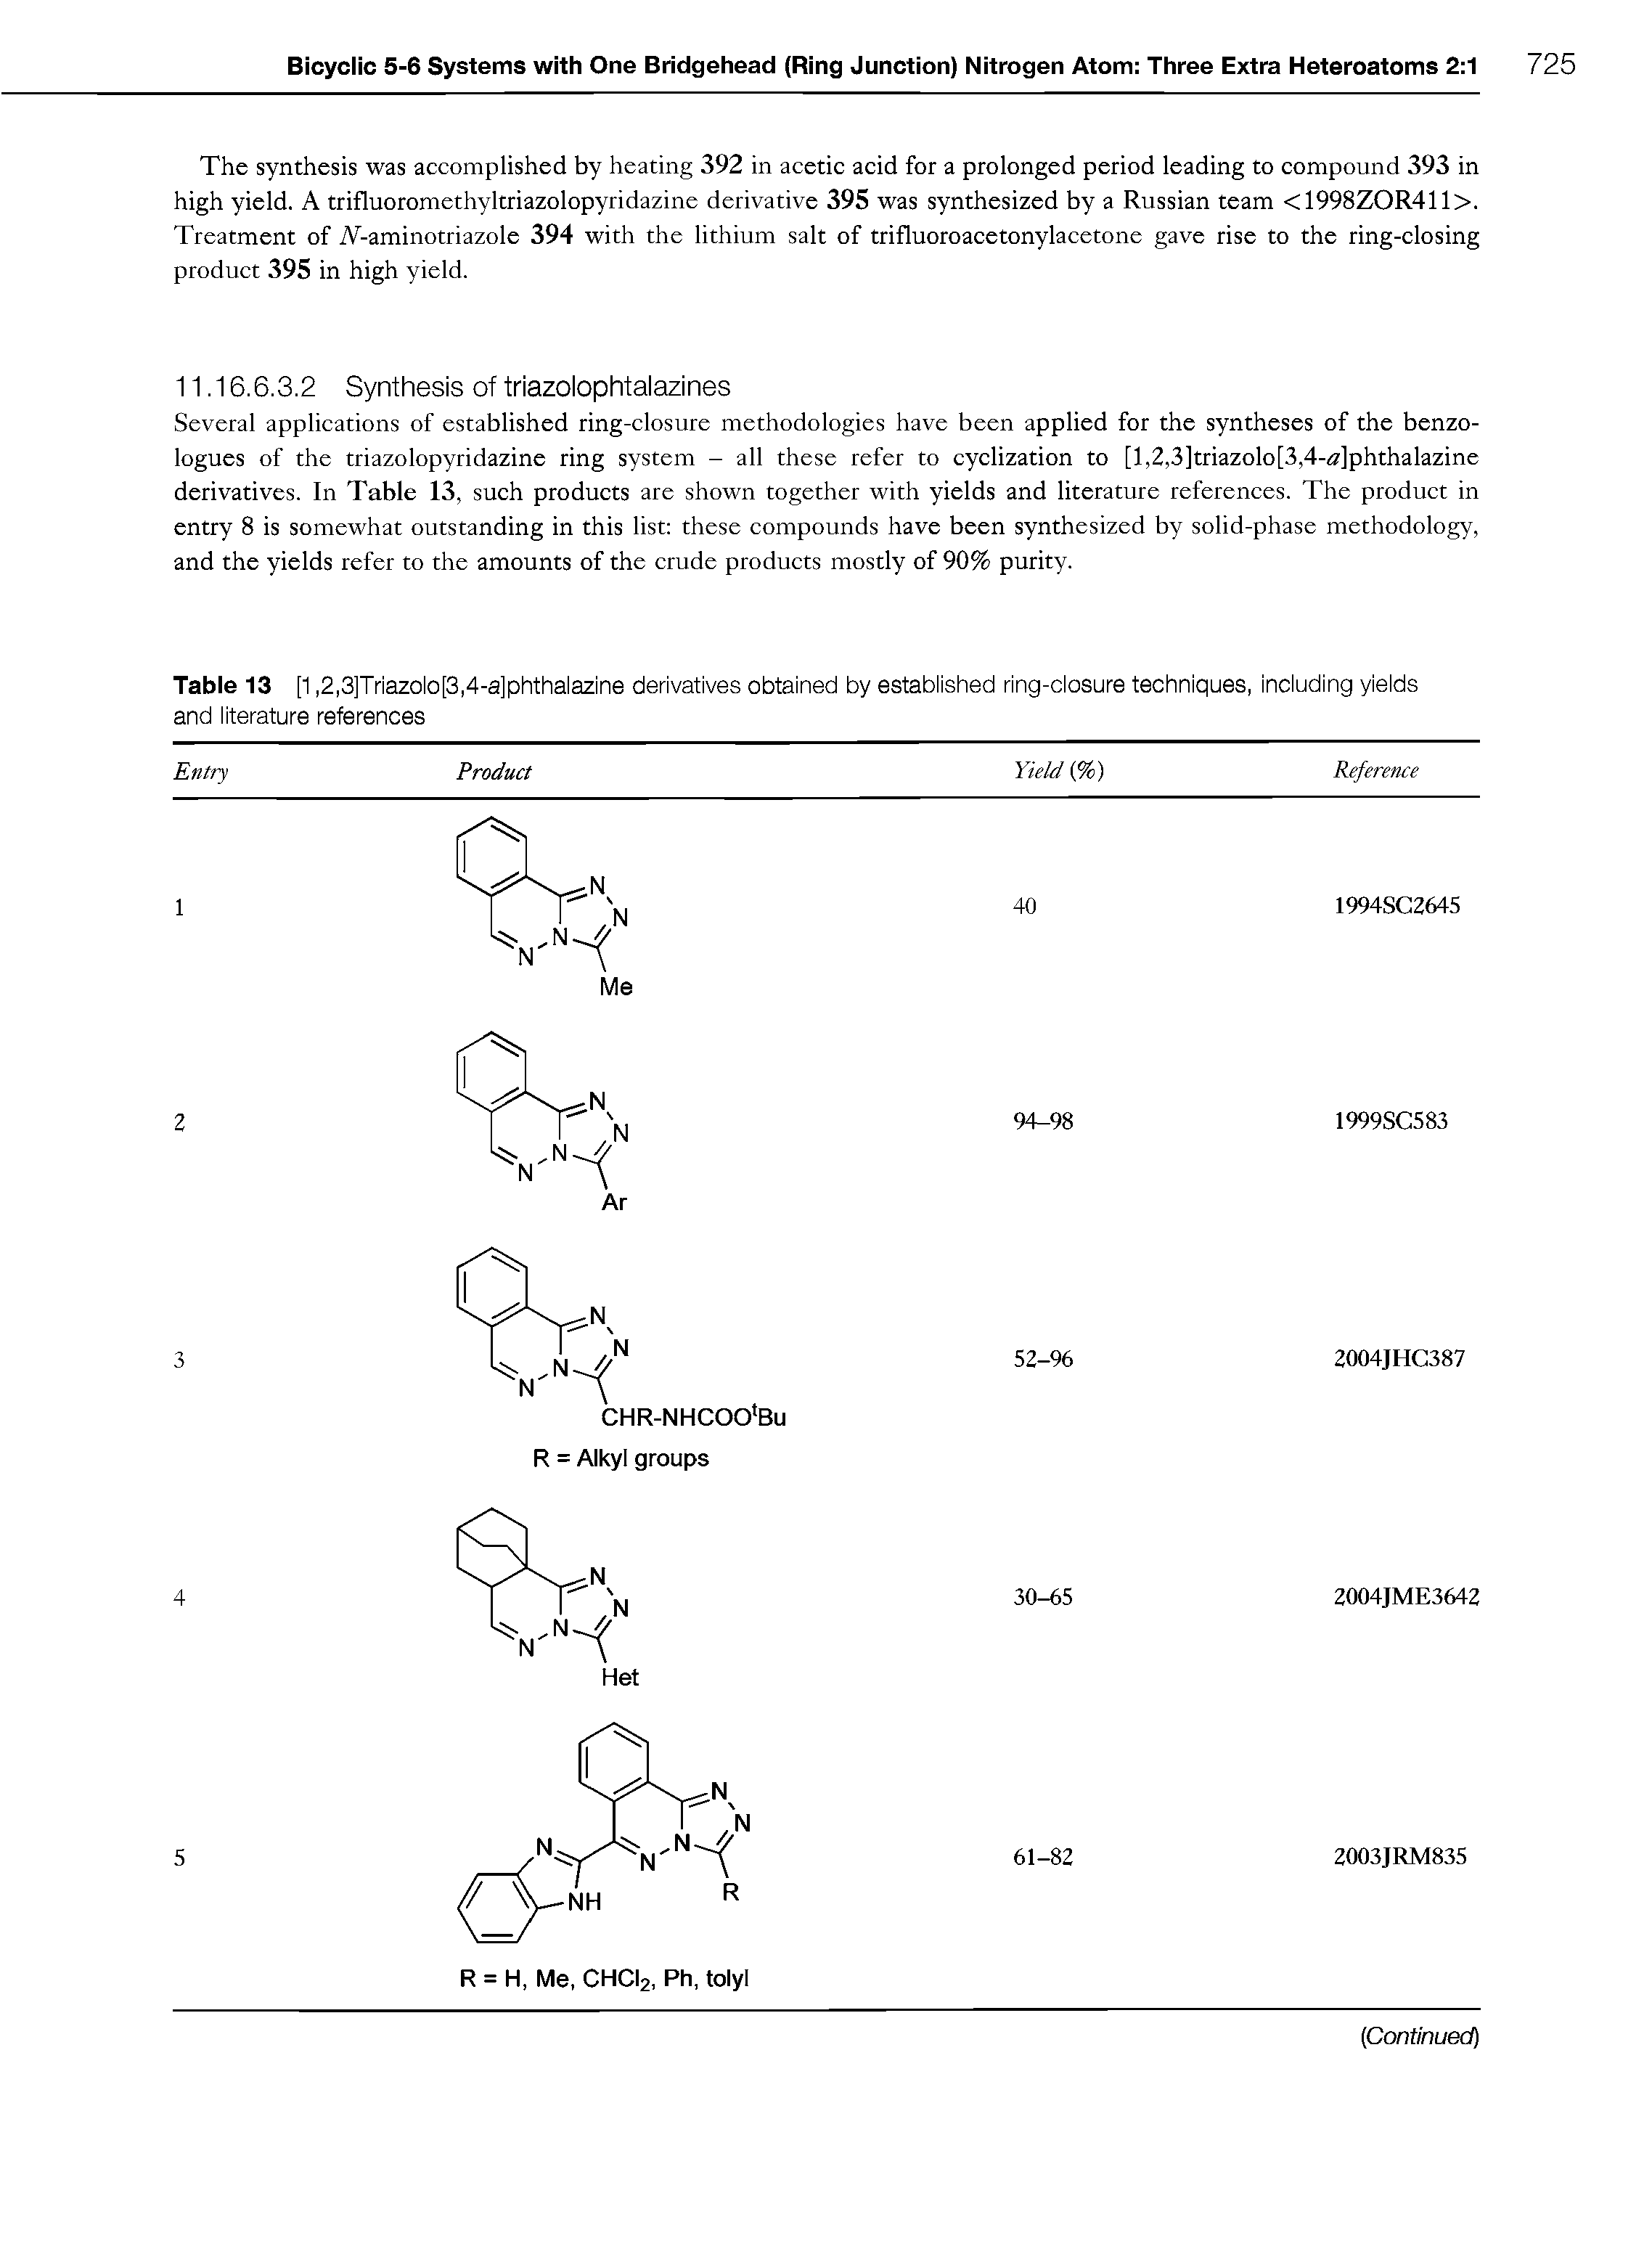 Table 13 [1,2,3]Triazolo[3,4-a]phthalazine derivatives obtained by established ring-closure techniques, including yields and literature references...